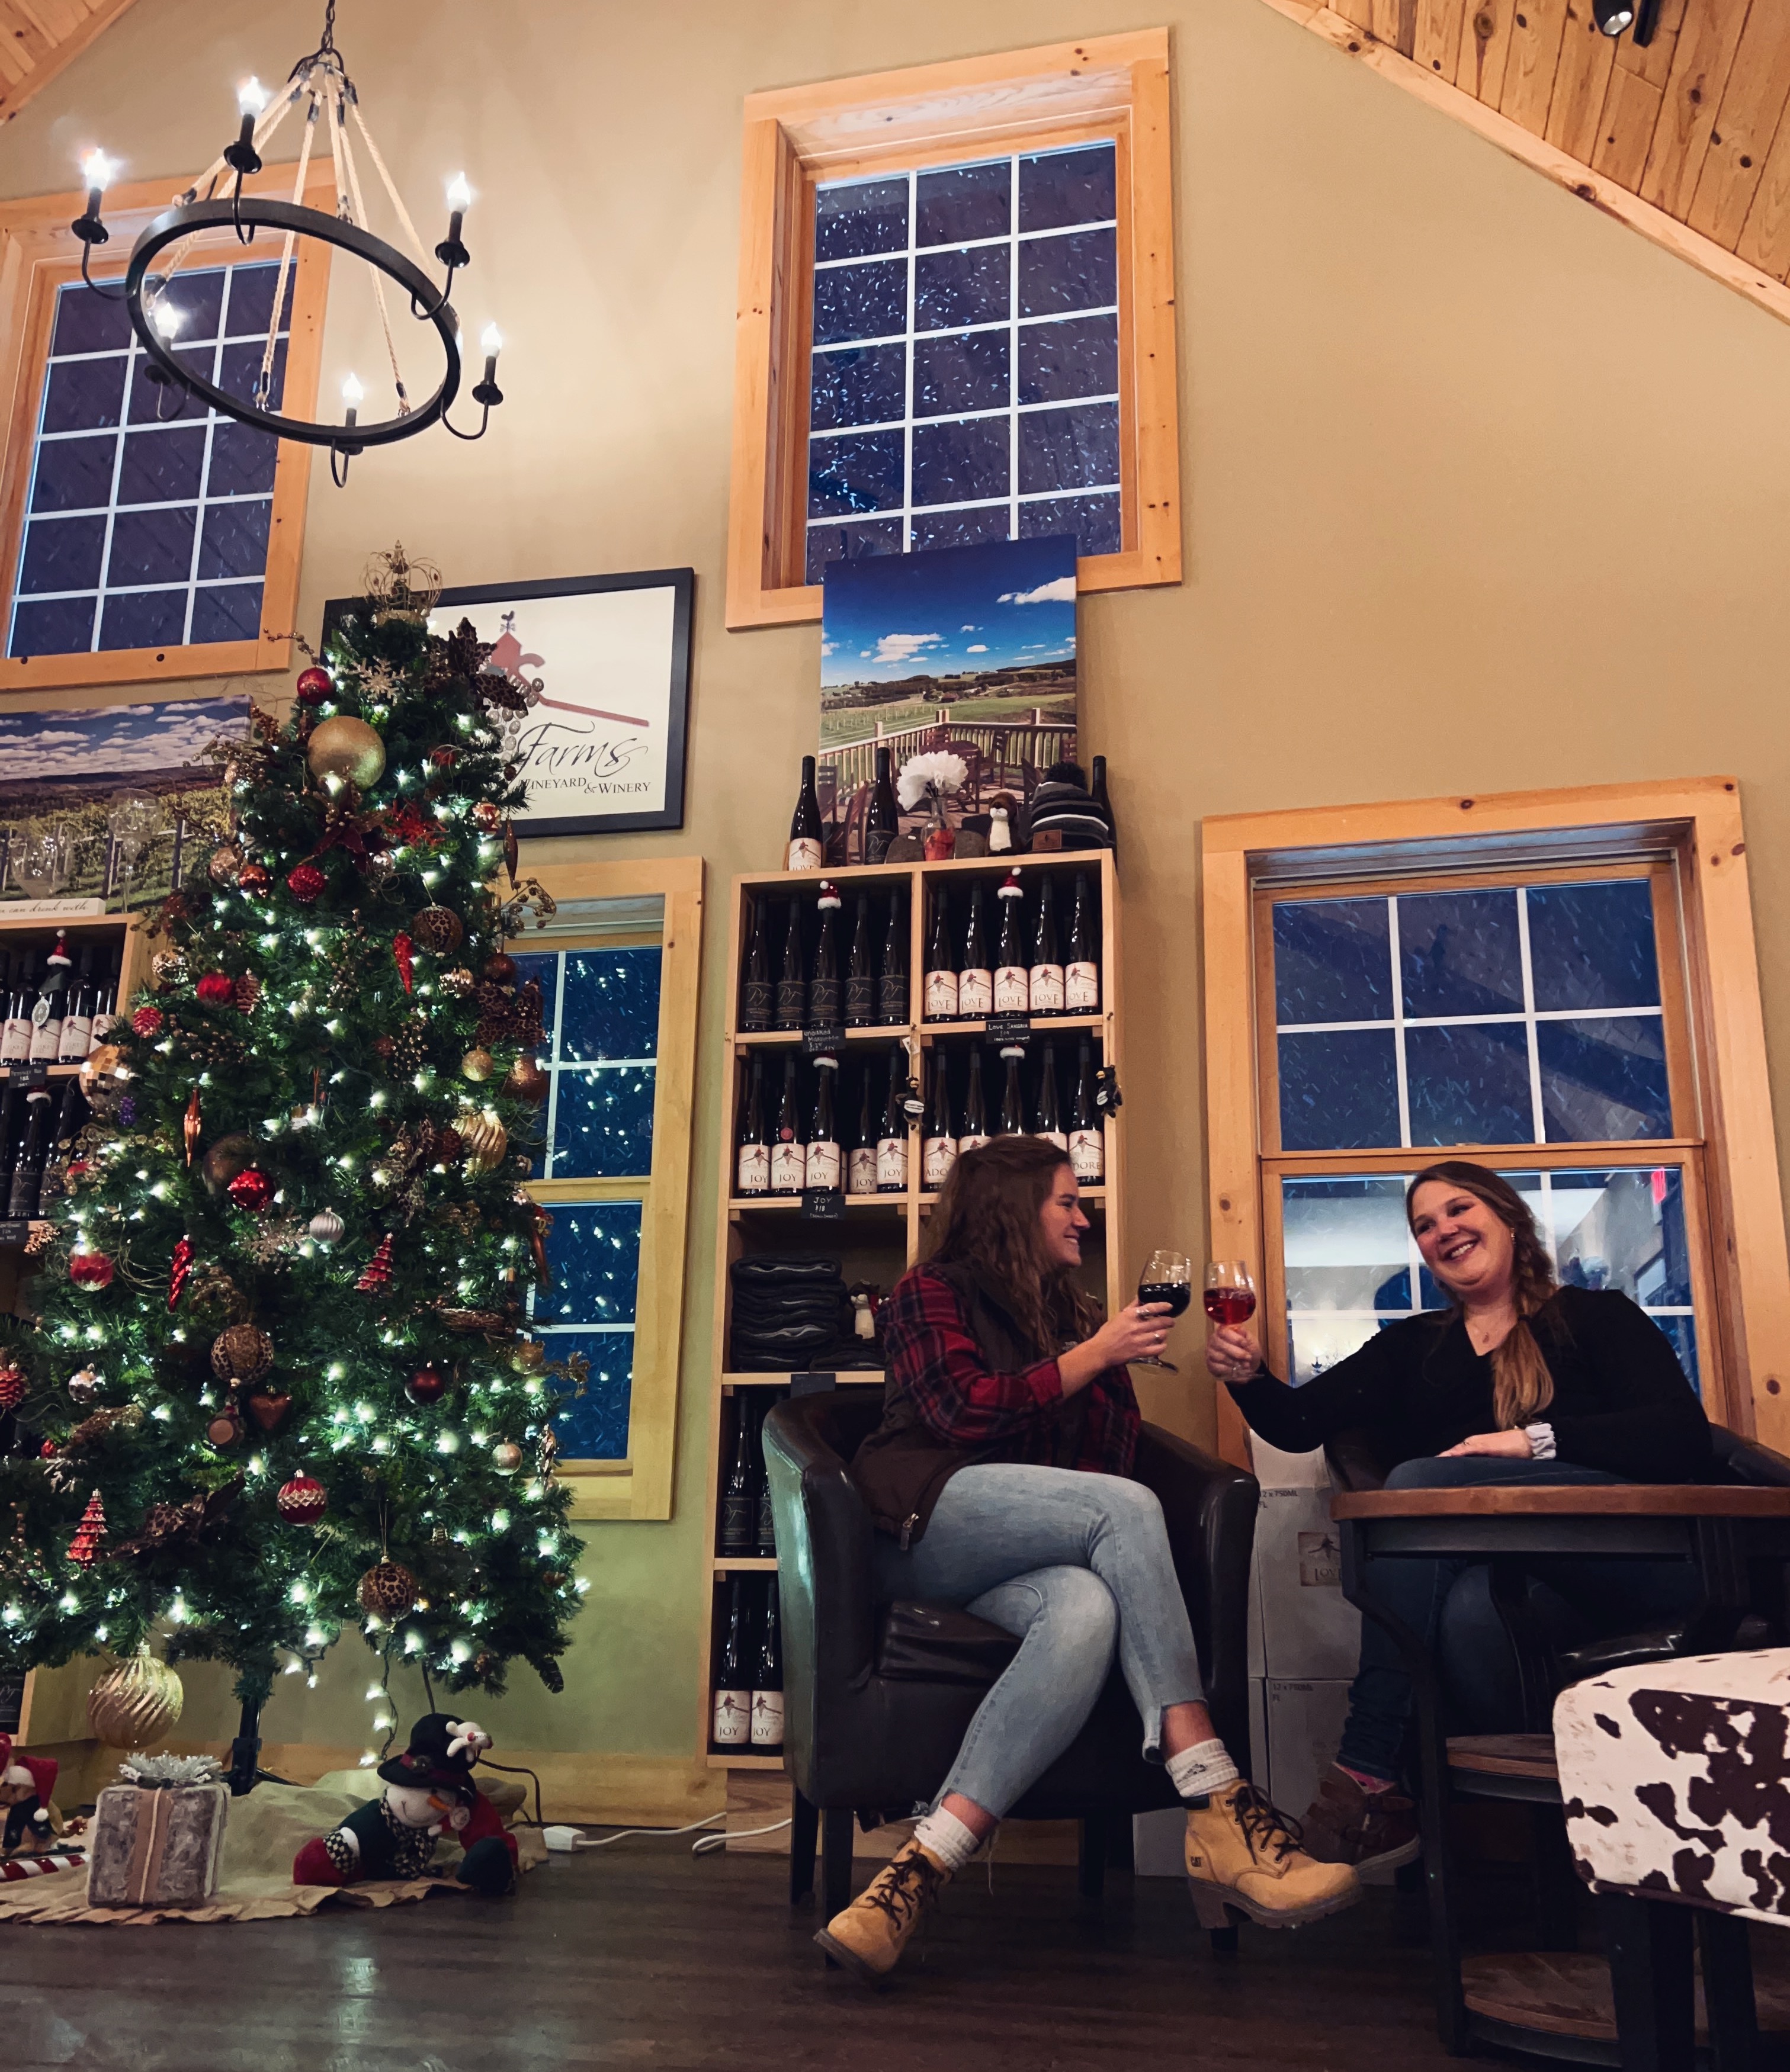 Two people drinking wine in the tasting room next to the Christmas tree.